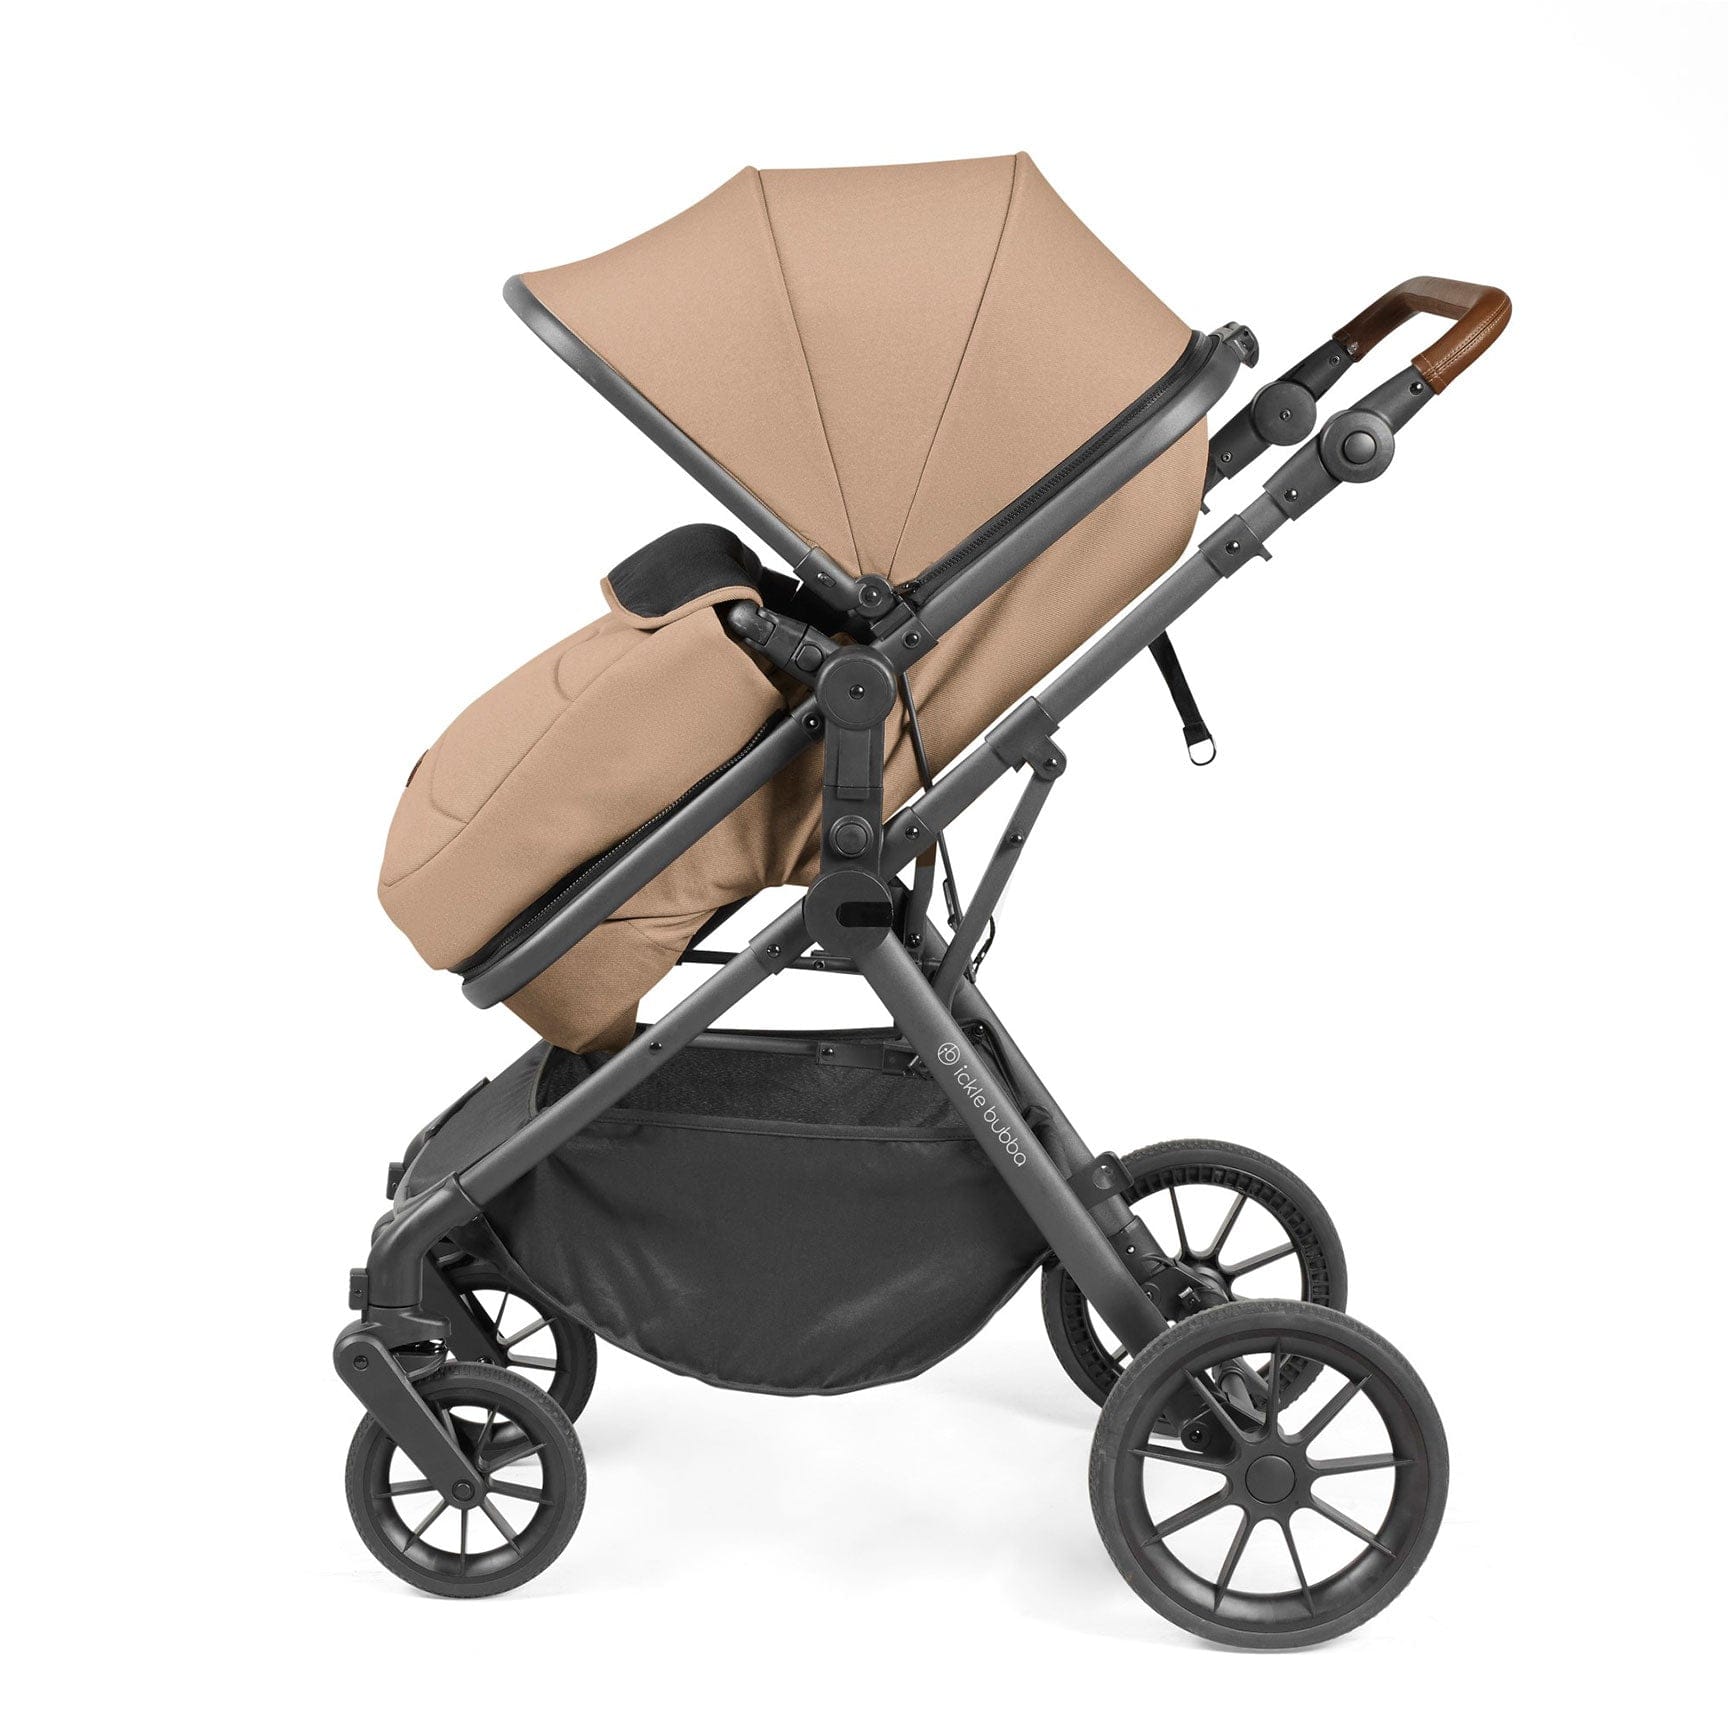 Ickle Bubba Cosmo All-in-One I-Size Travel System with Isofix Base in Desert/Gun Metal Travel Systems 10-007-300-136 5056515025859